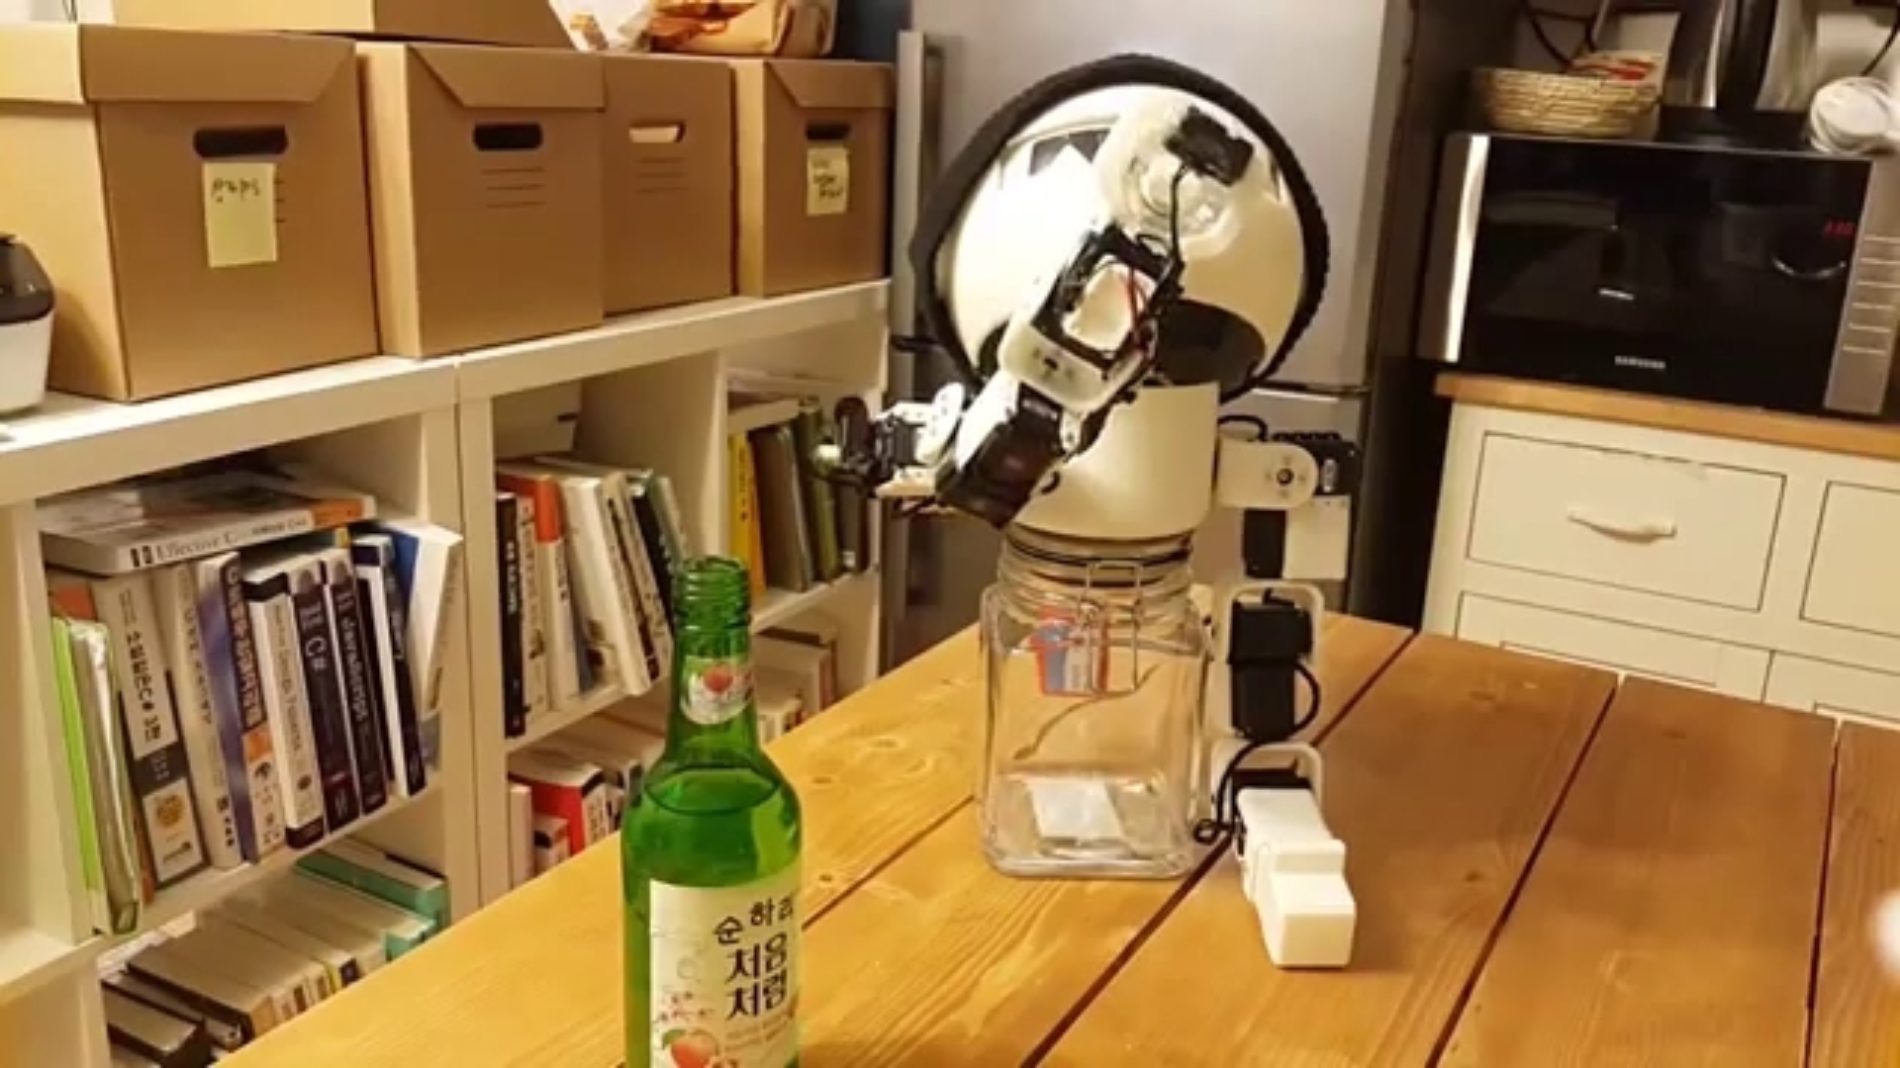 Robot as drinking buddy? No problem!